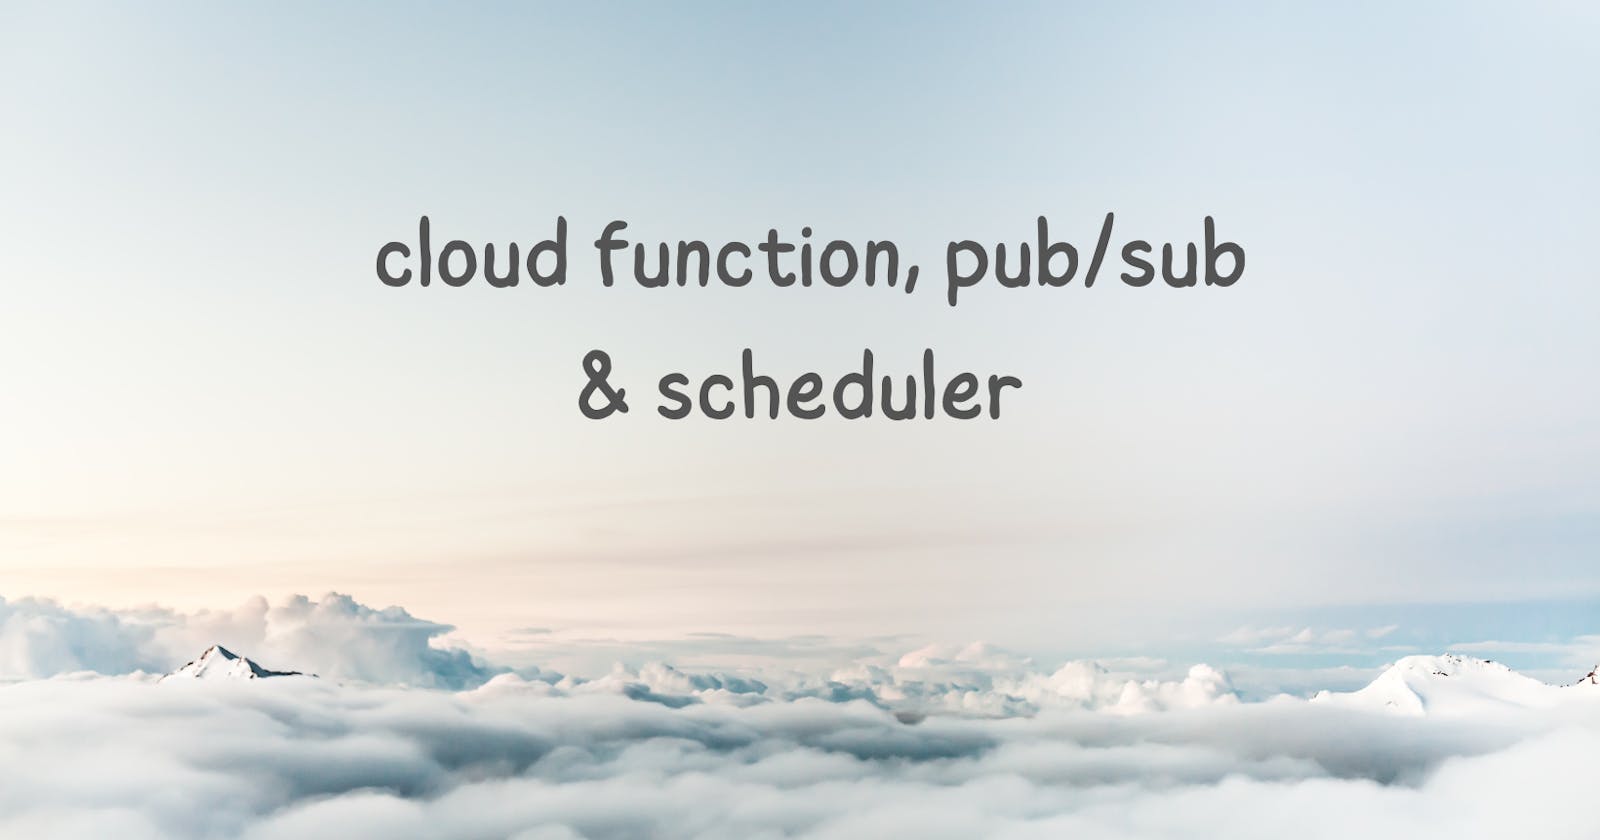 cloud ☁️ function, pub/sub and scheduler